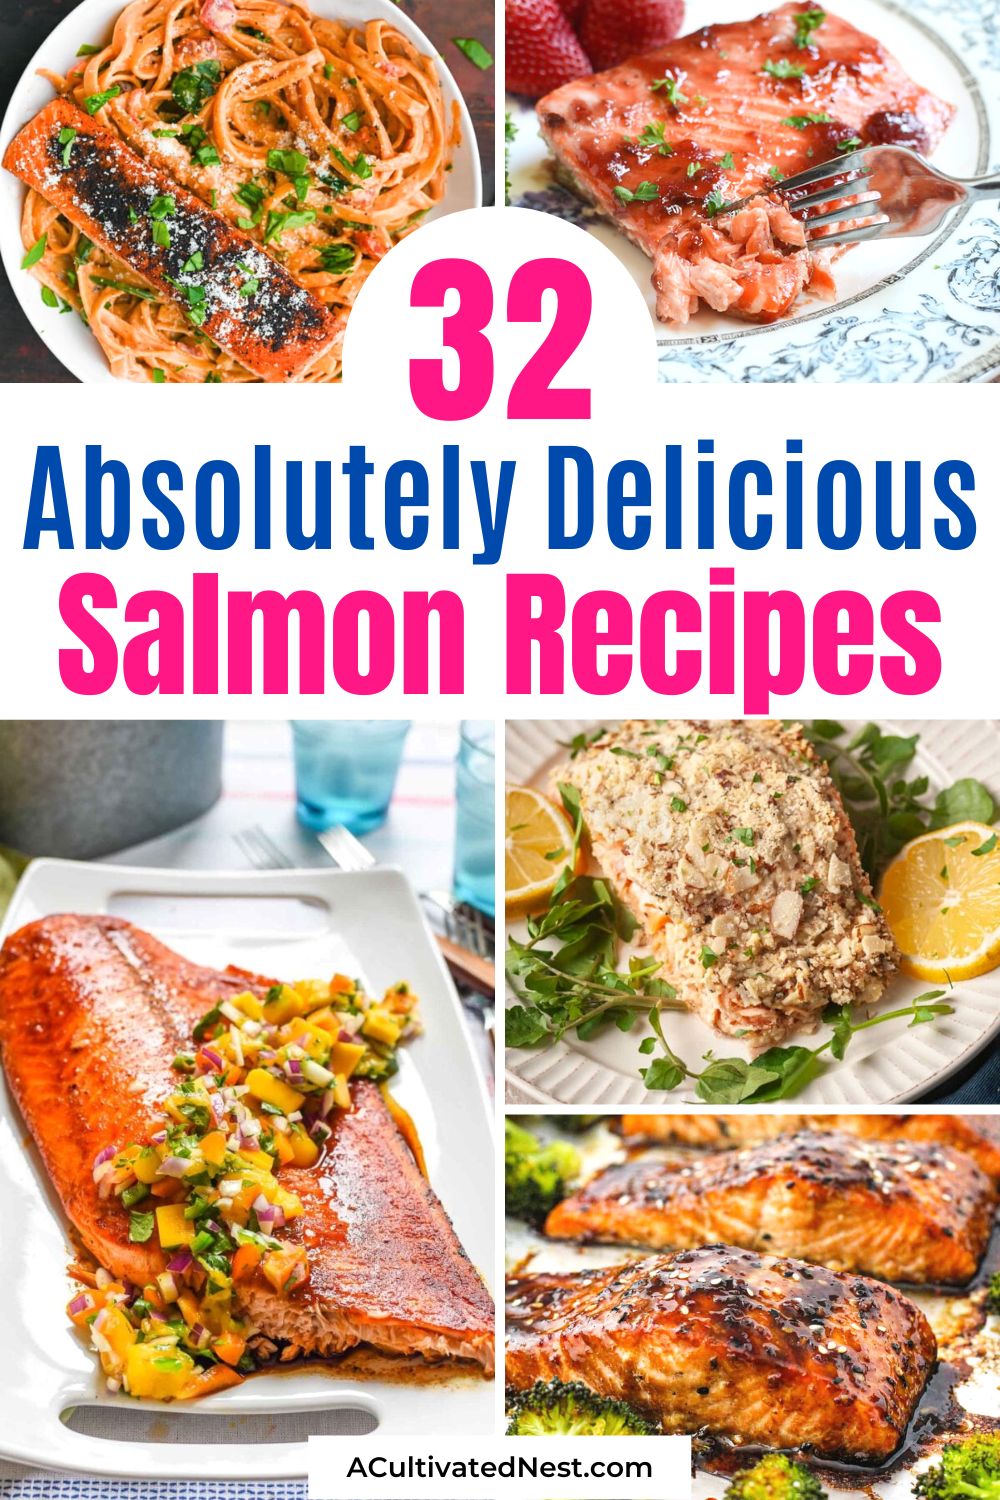 32 Delicious Salmon Recipes- Salmon can be very delicious and easy to cook, if you have the right recipe! Here are 32 delicious salmon recipes you need to try! | healthy dinner ideas, healthy recipes, #salmonRecipes #fishRecipes #recipeIdeas #dinnerRecipes #ACultivatedNest